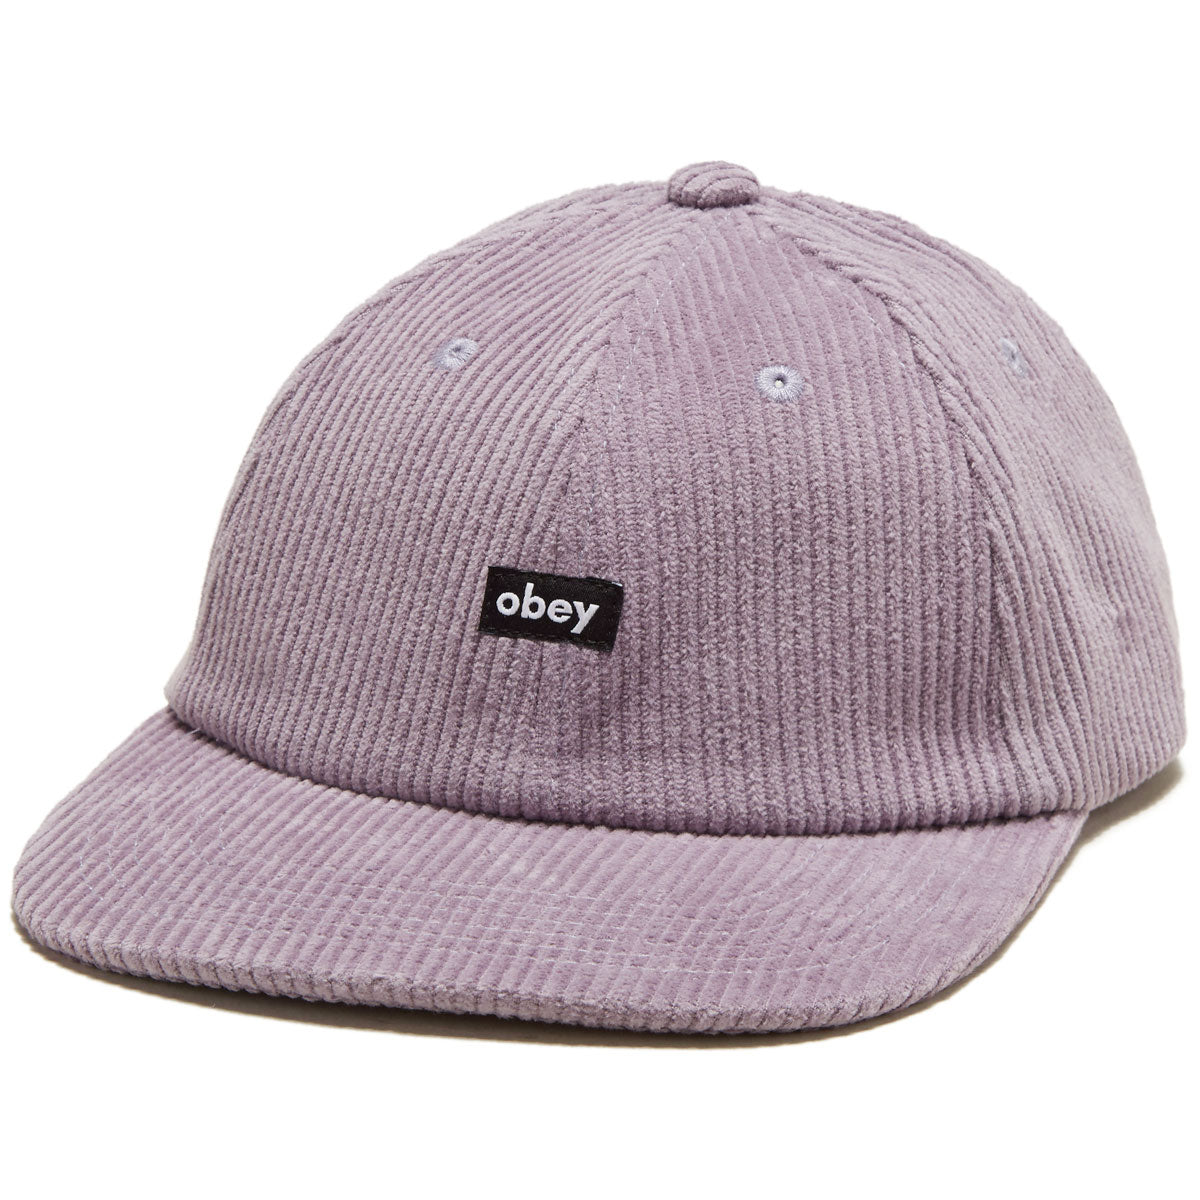 Obey Cord Label 6 Panel Strapback Hat - Wineberry image 1